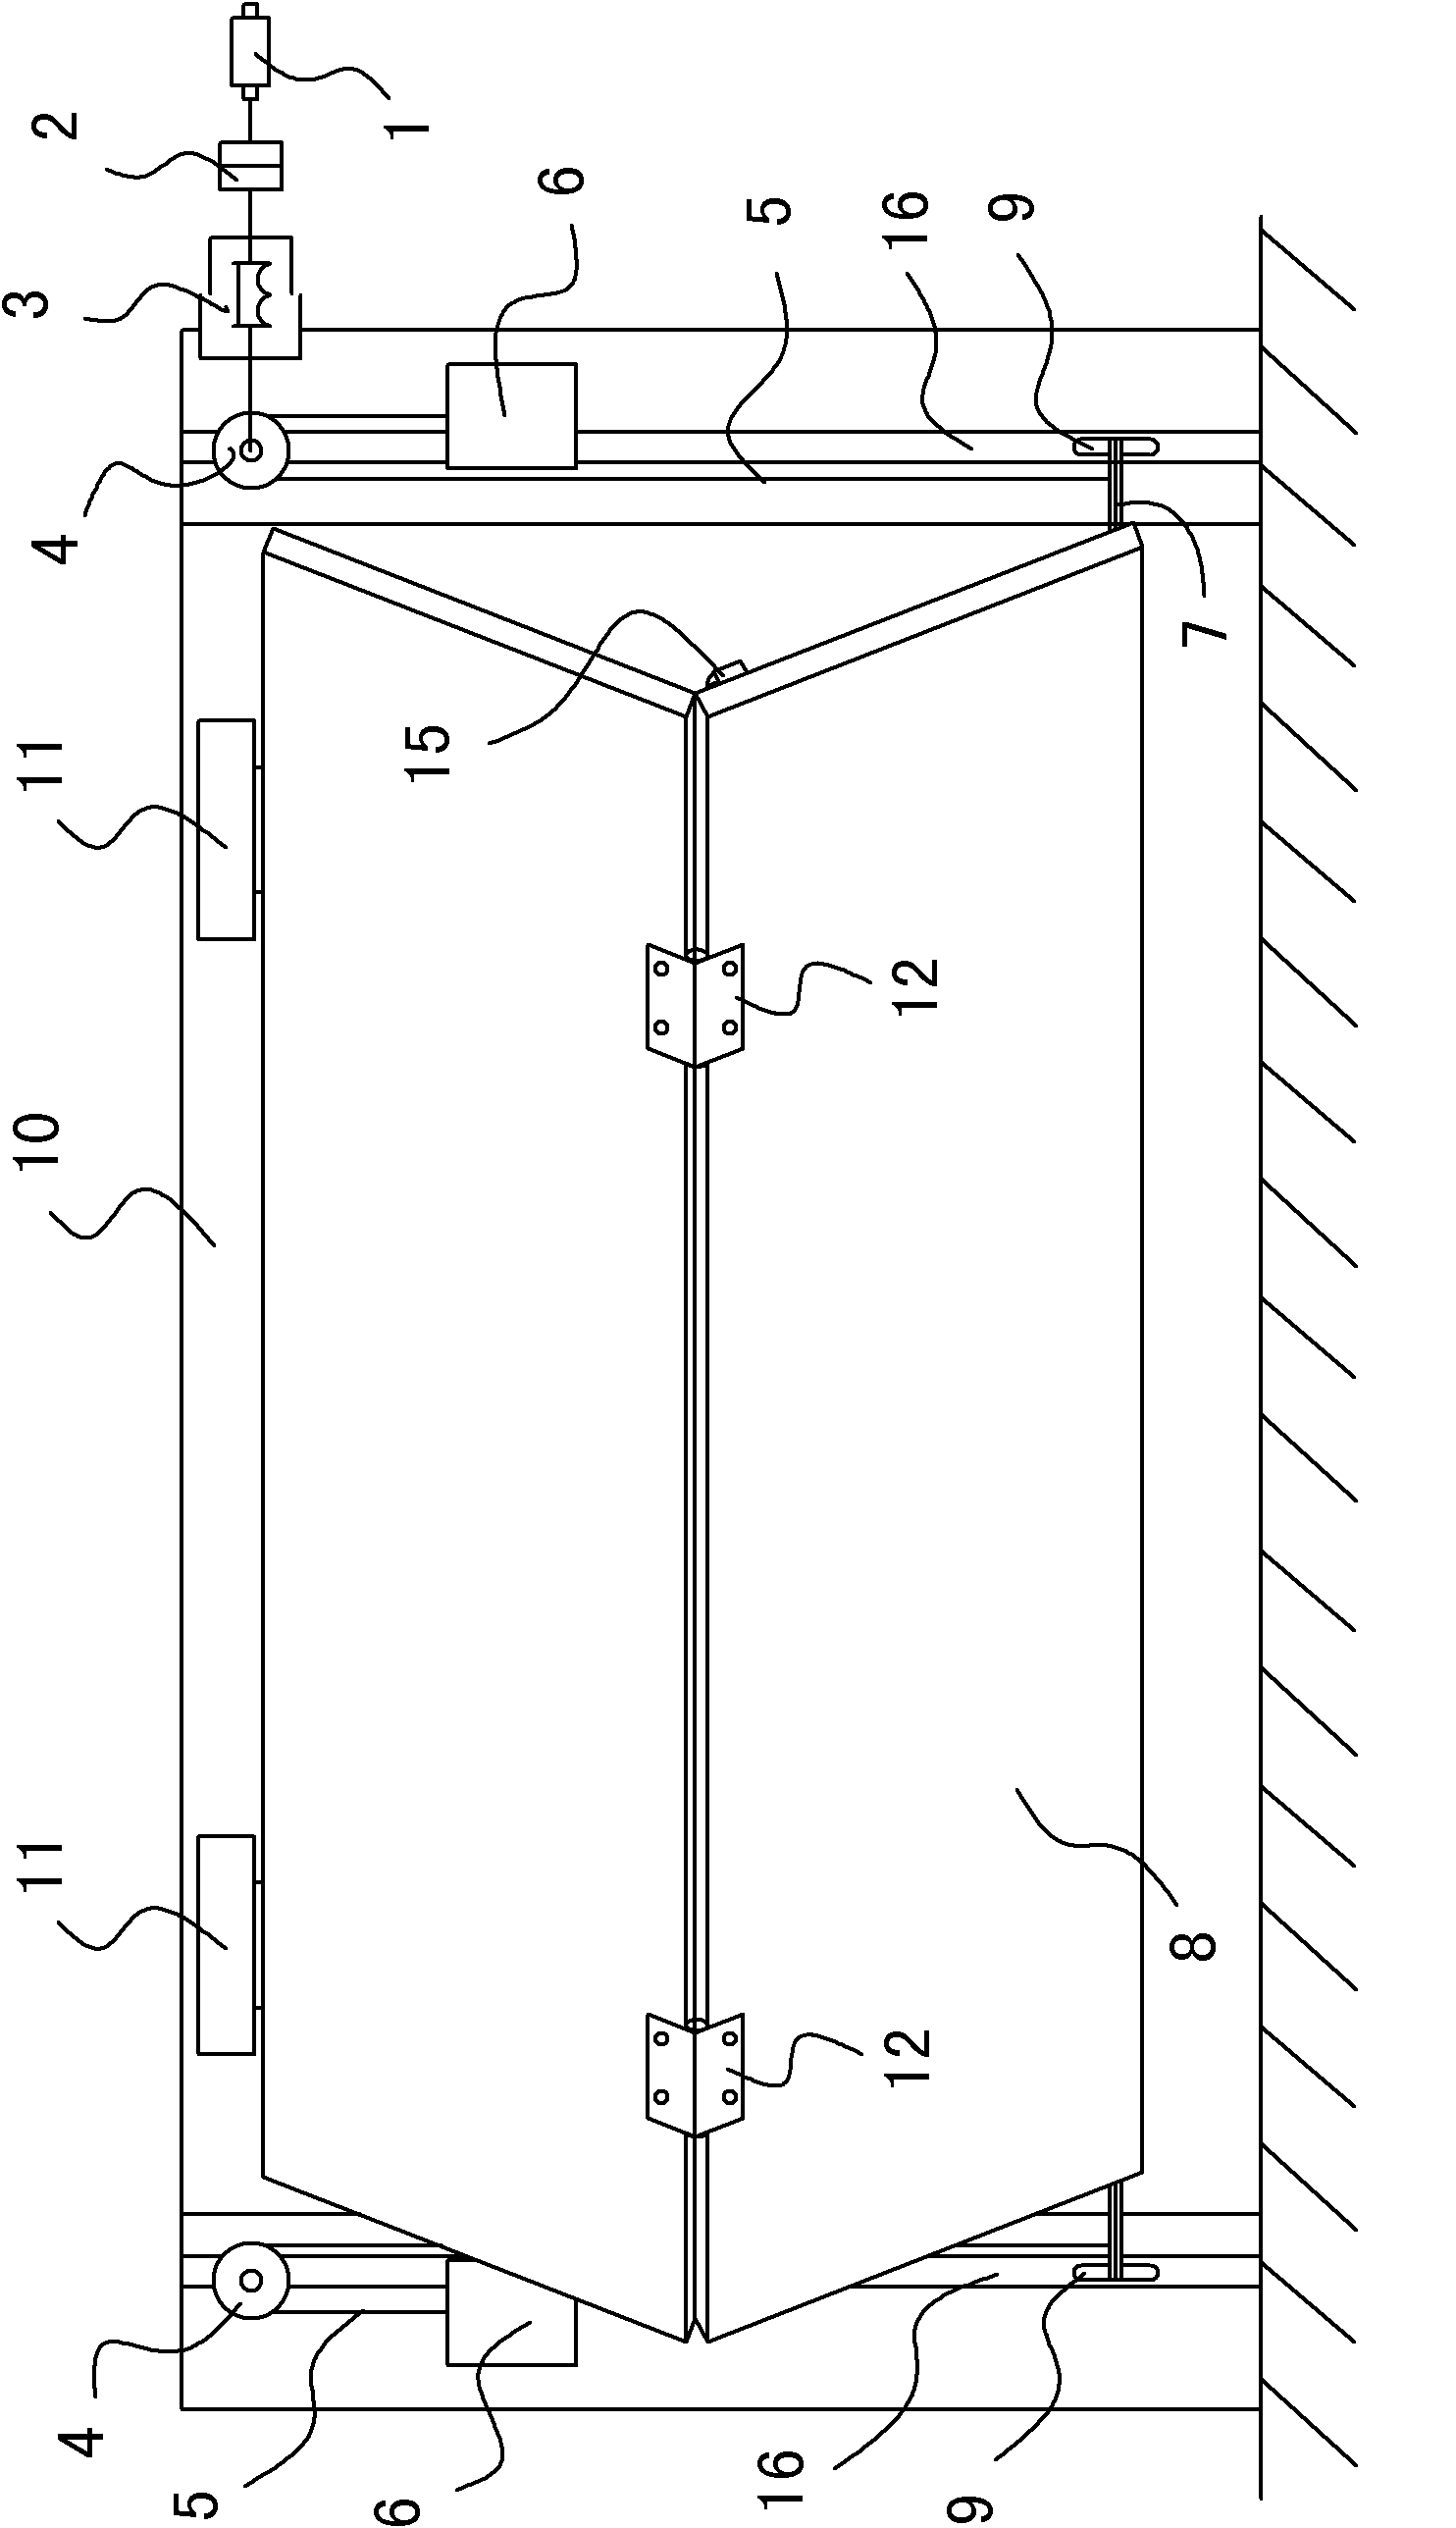 Electrical device for opening and closing folding door or window